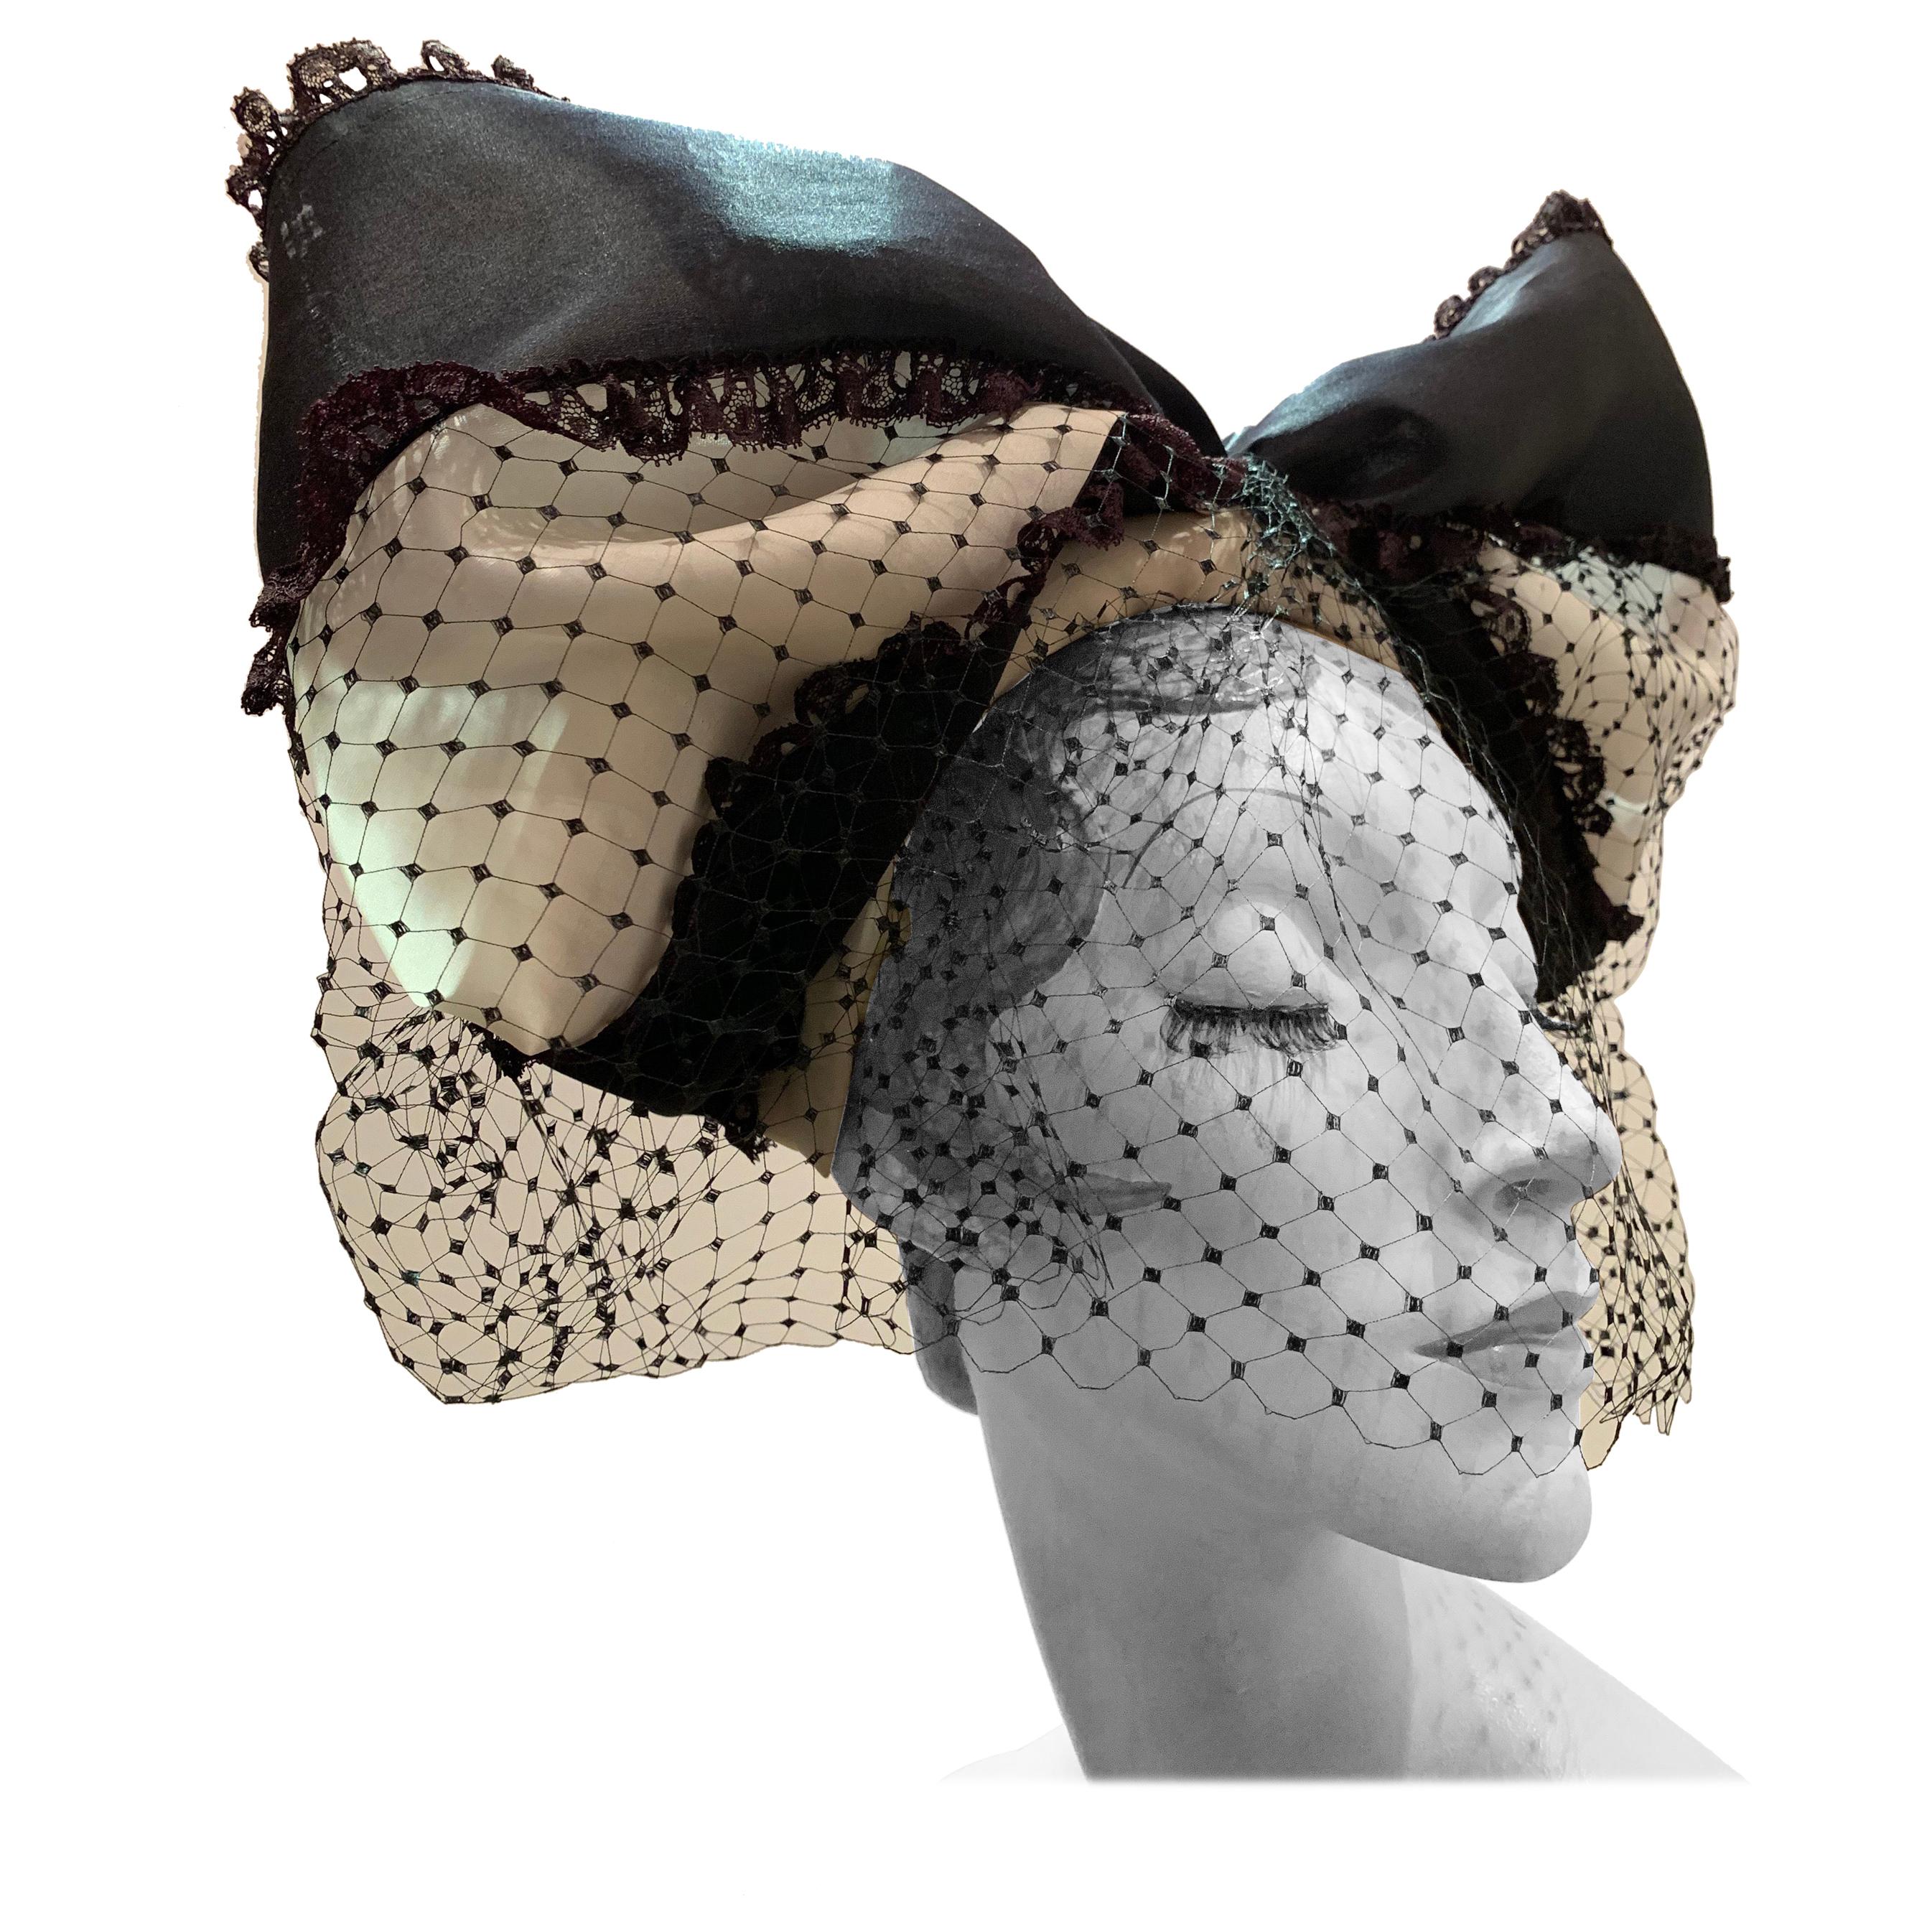 Torso Creations Black & White Bow Headband W/ Dotted Veiling For Sale